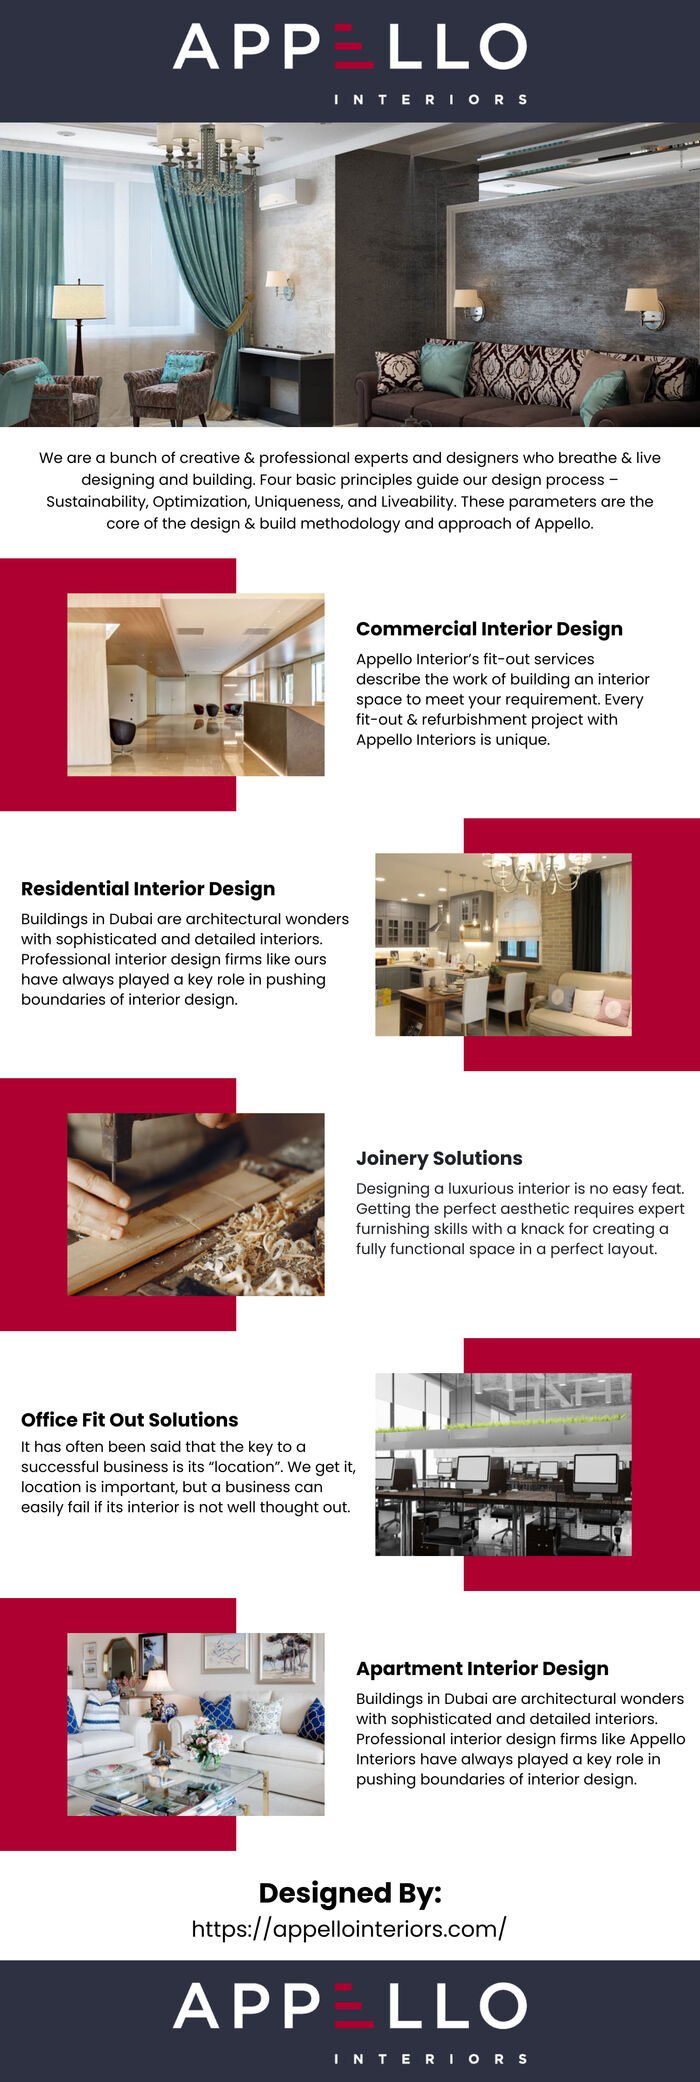 This infographic is designed by Appello Interiors LLC